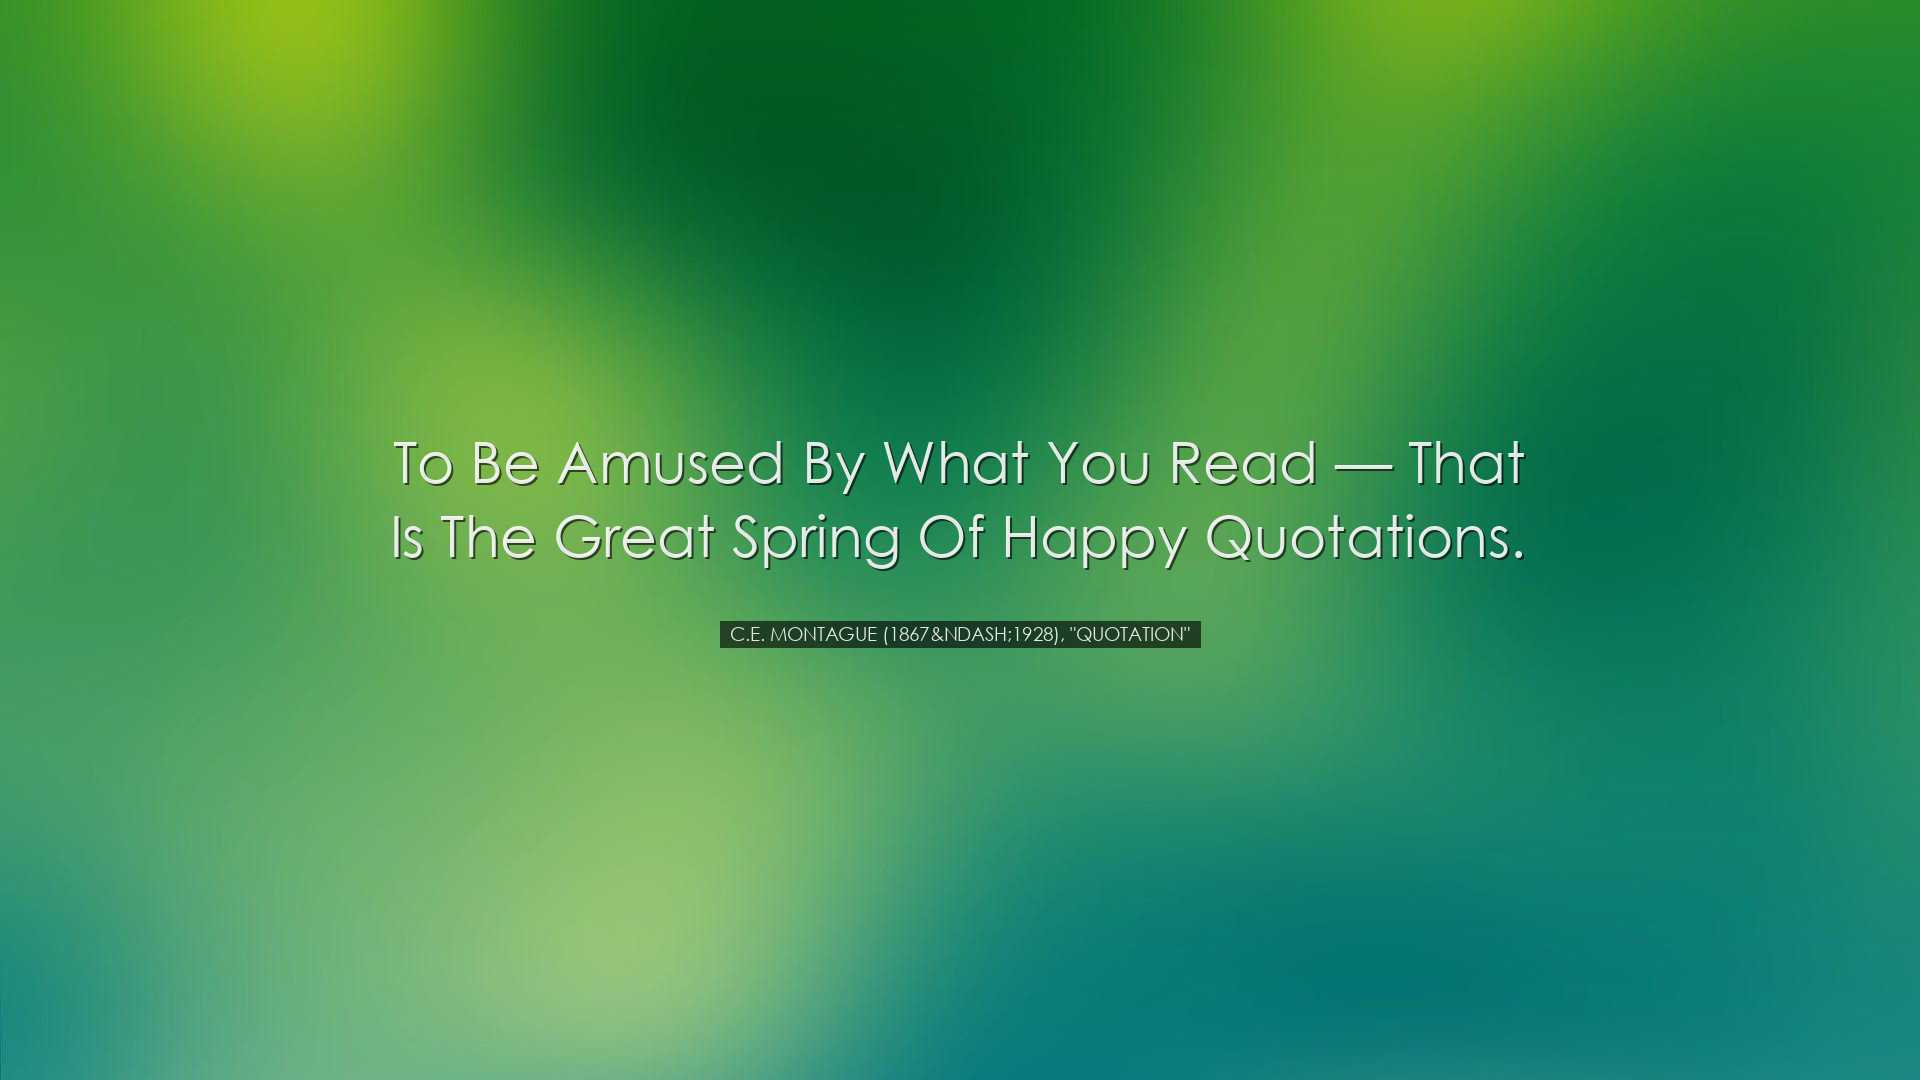 To be amused by what you read — that is the great spring of